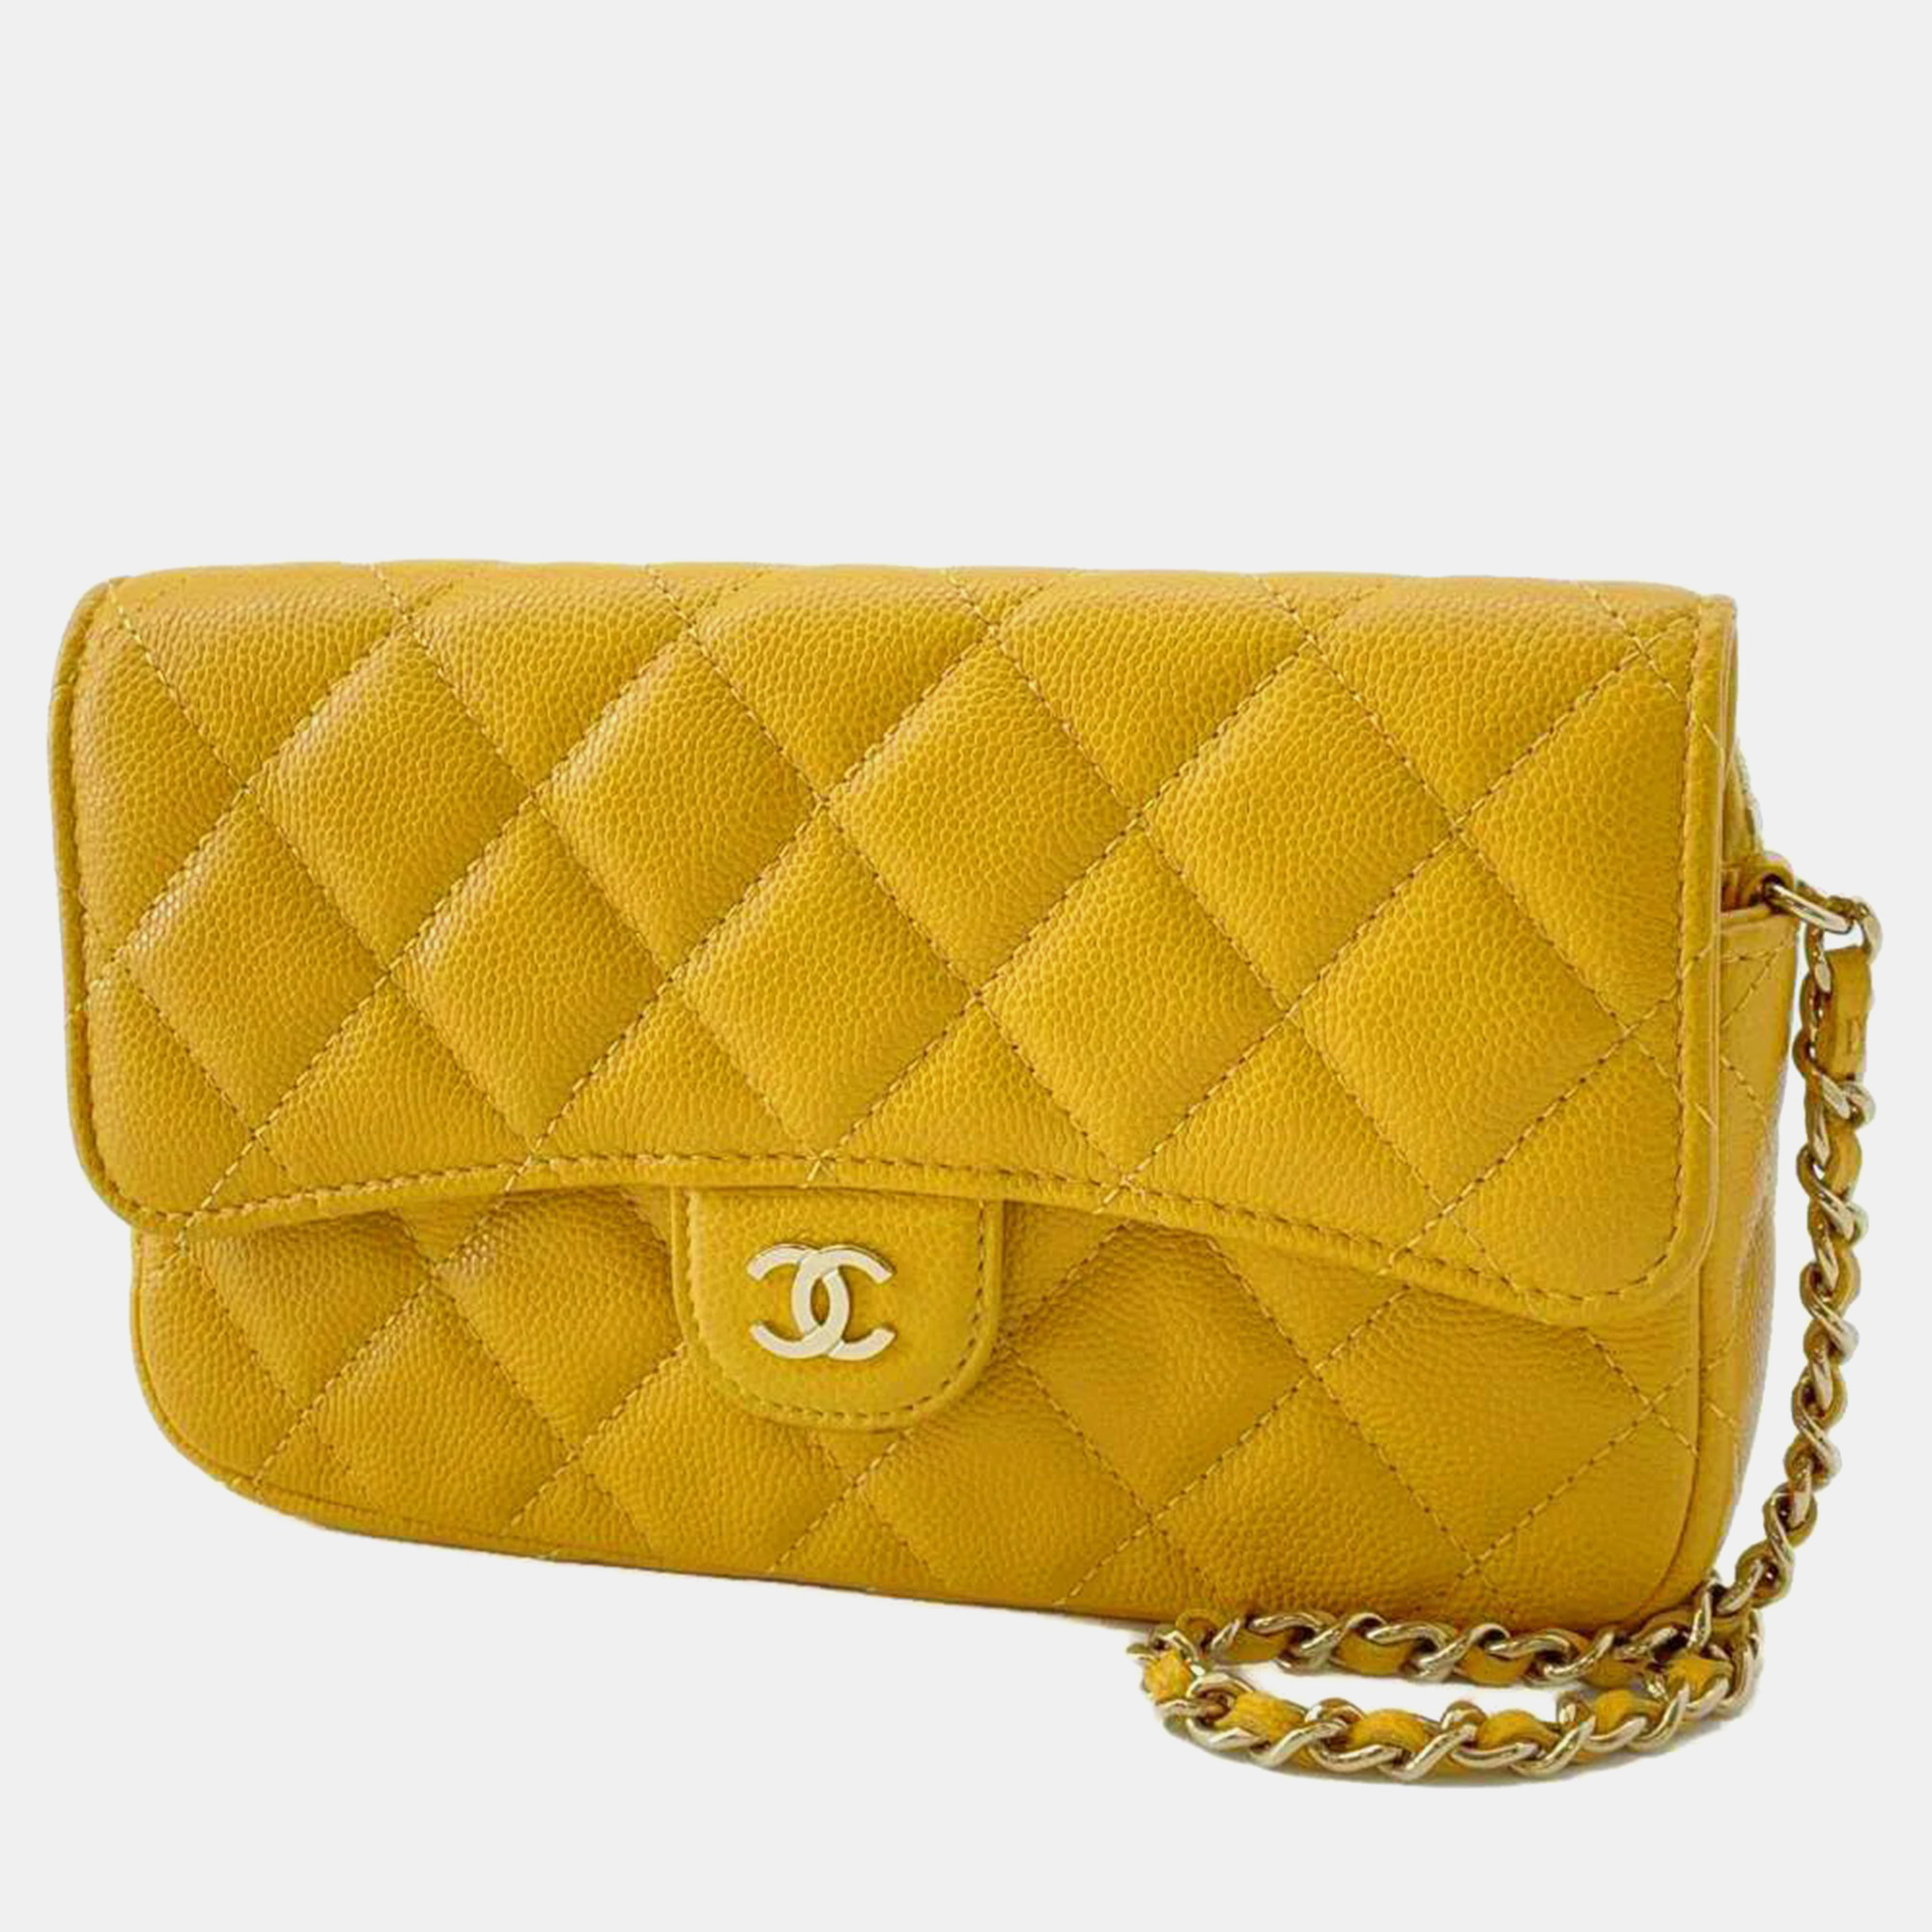 Chanel yellow soft caviar leather flap phone case chain shoulder bag